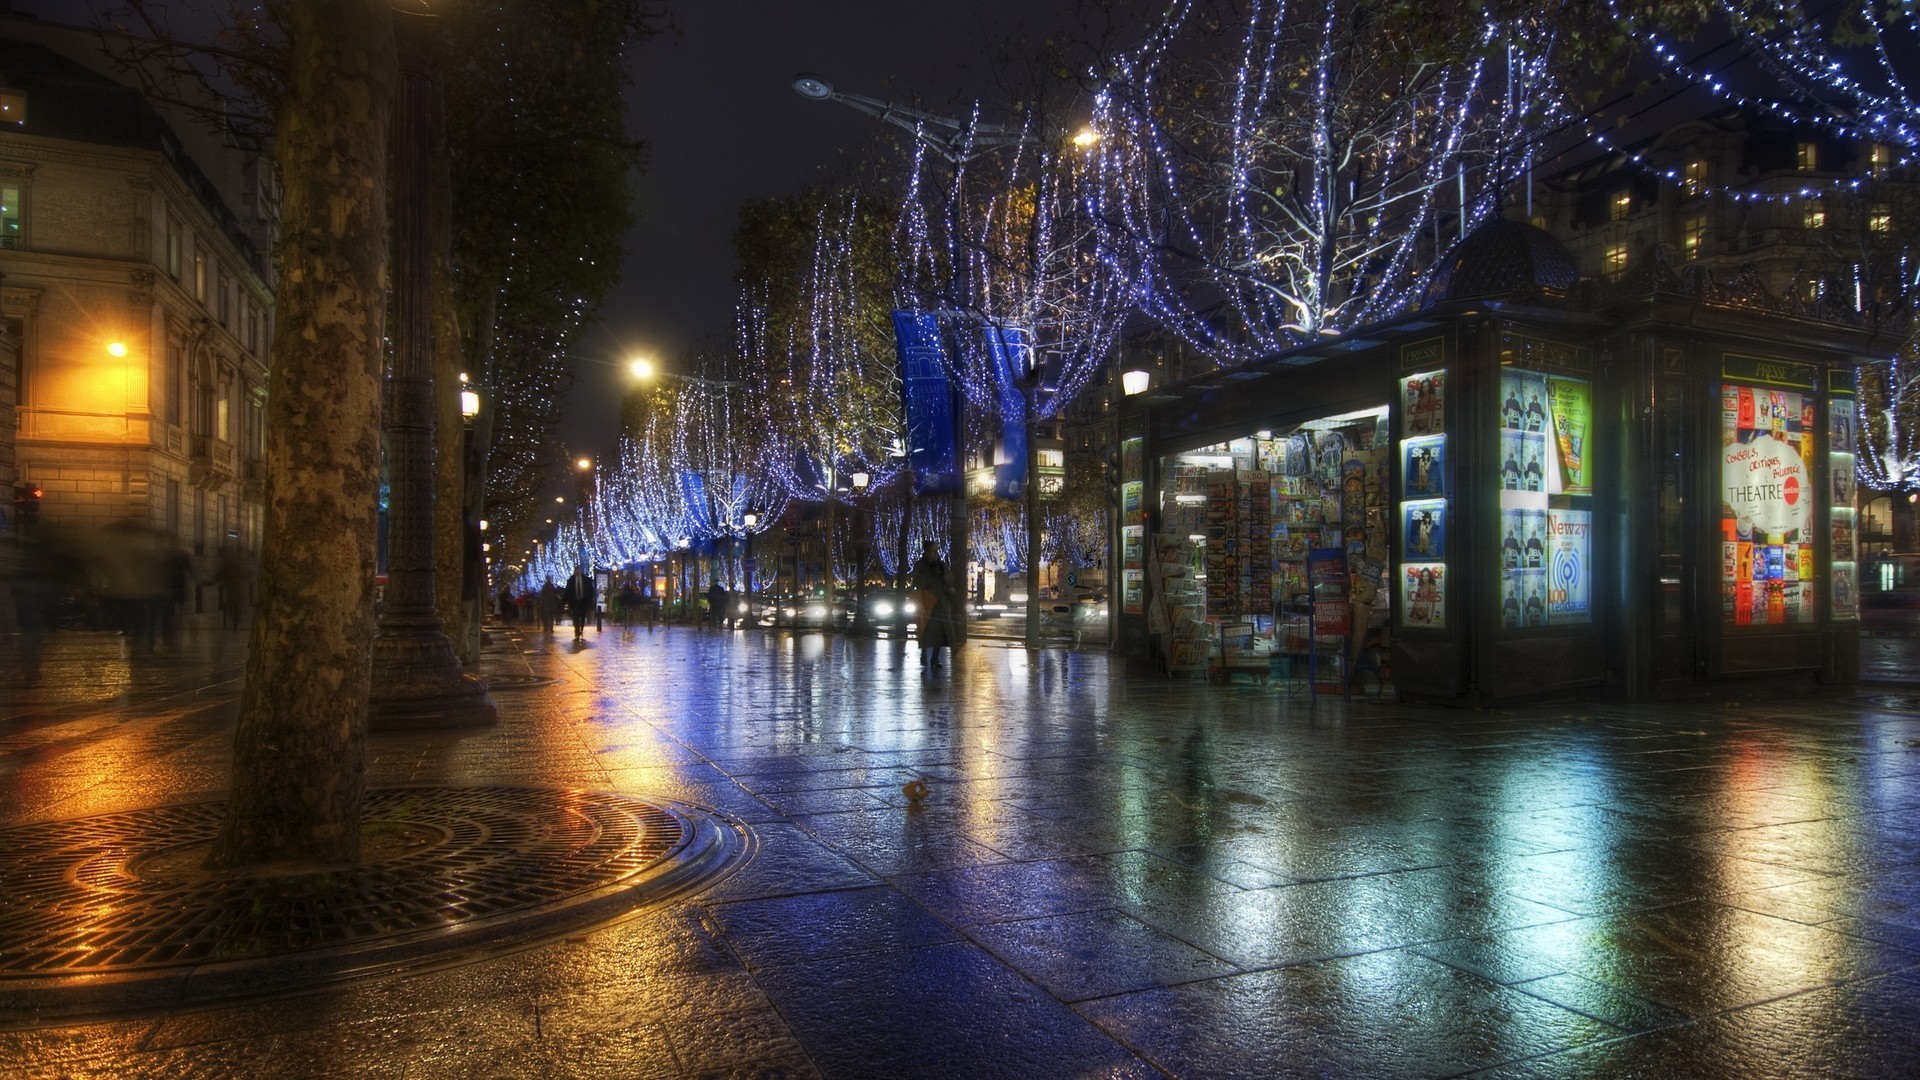 1920x1080 Night in the streets of paris hdr wallpaper